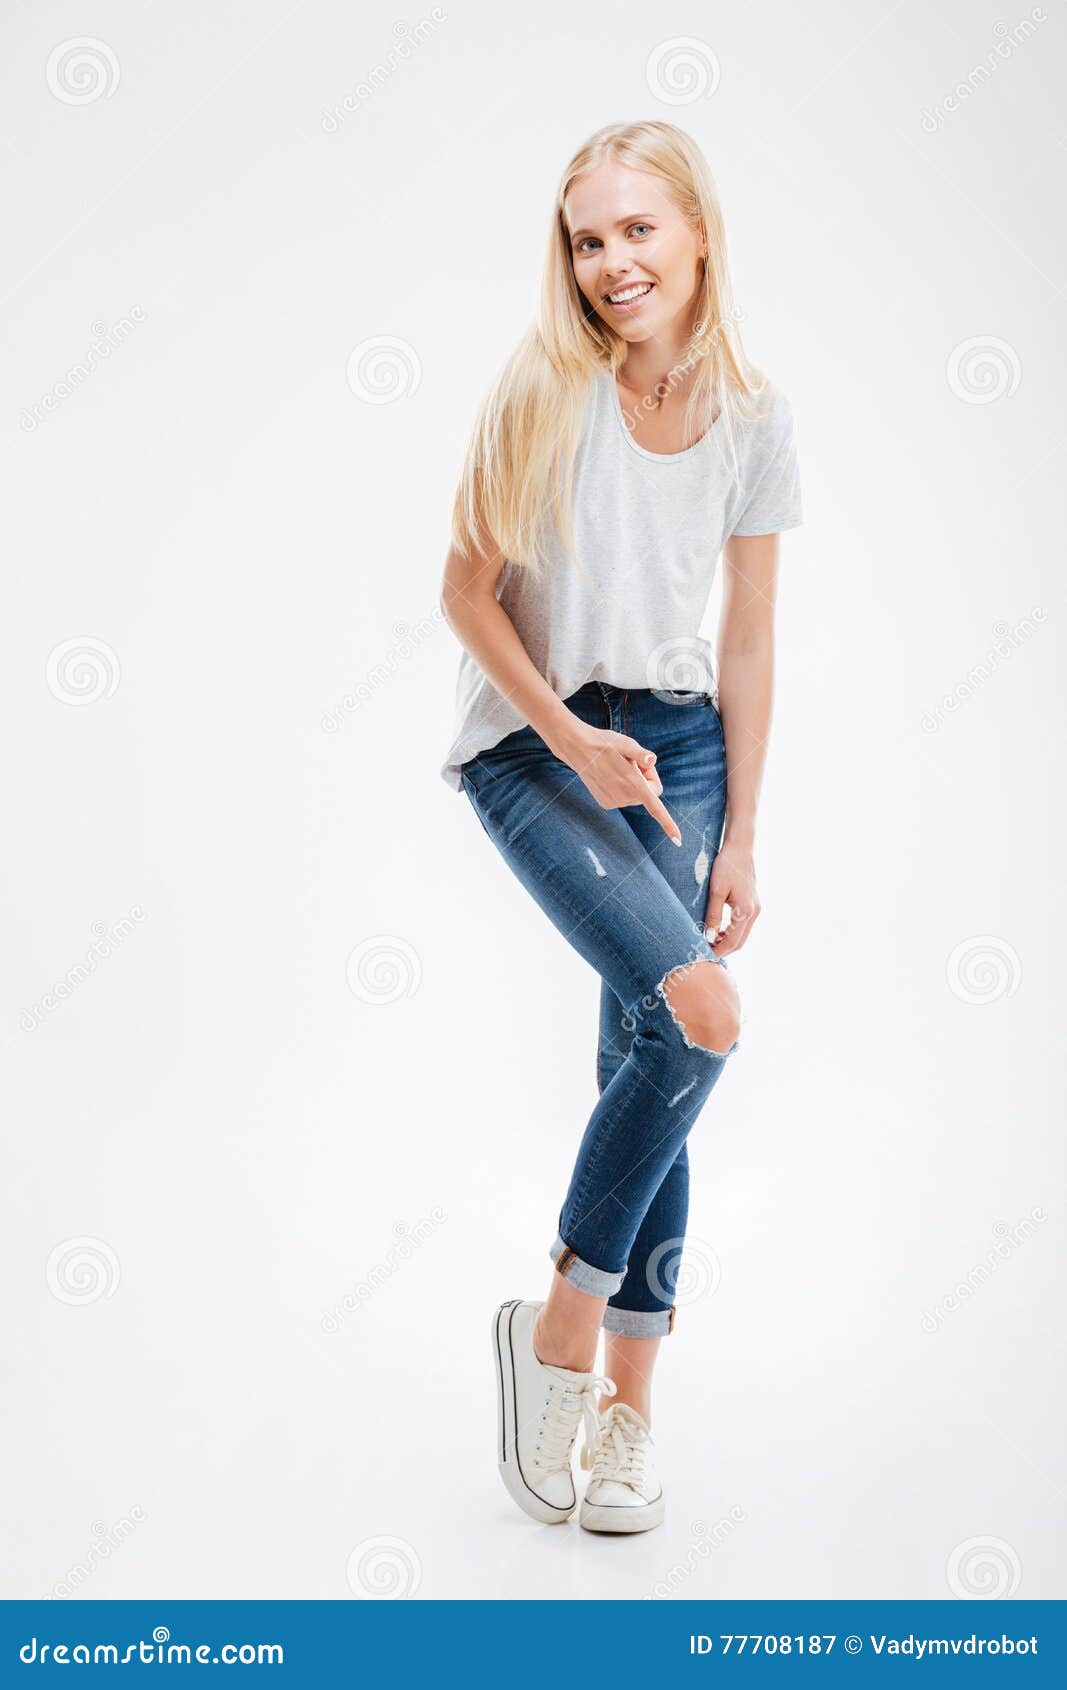 women, sitting, jeans, torn jeans, ripped clothing, ripped 